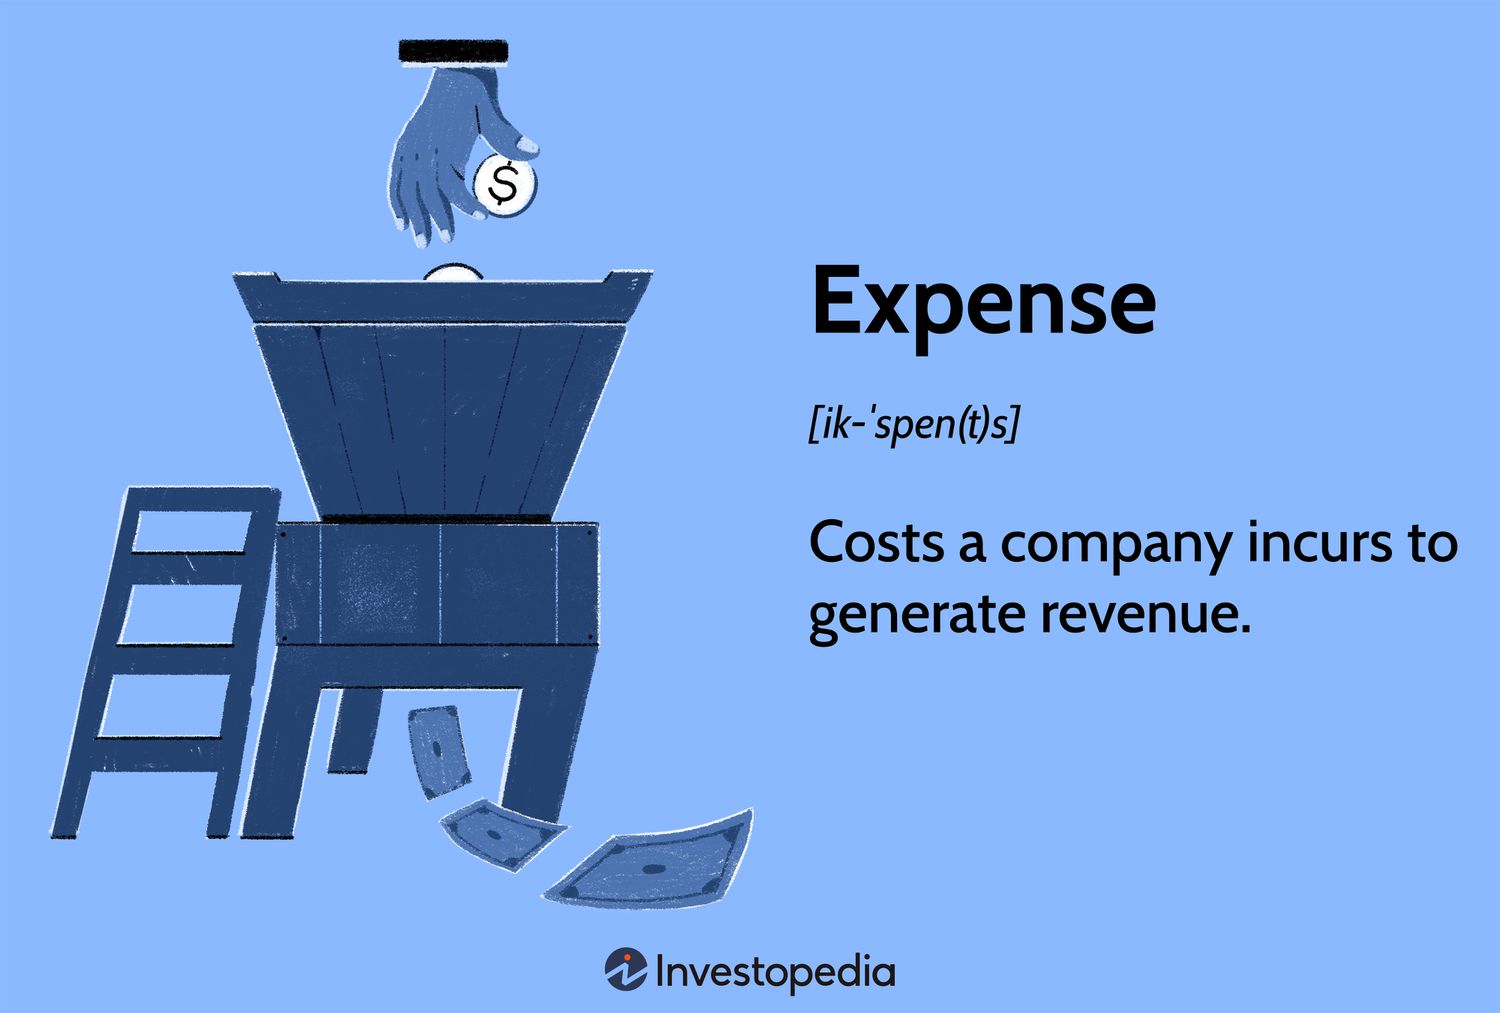 Definition, Types, and How Expenses Are Recorded [Video]